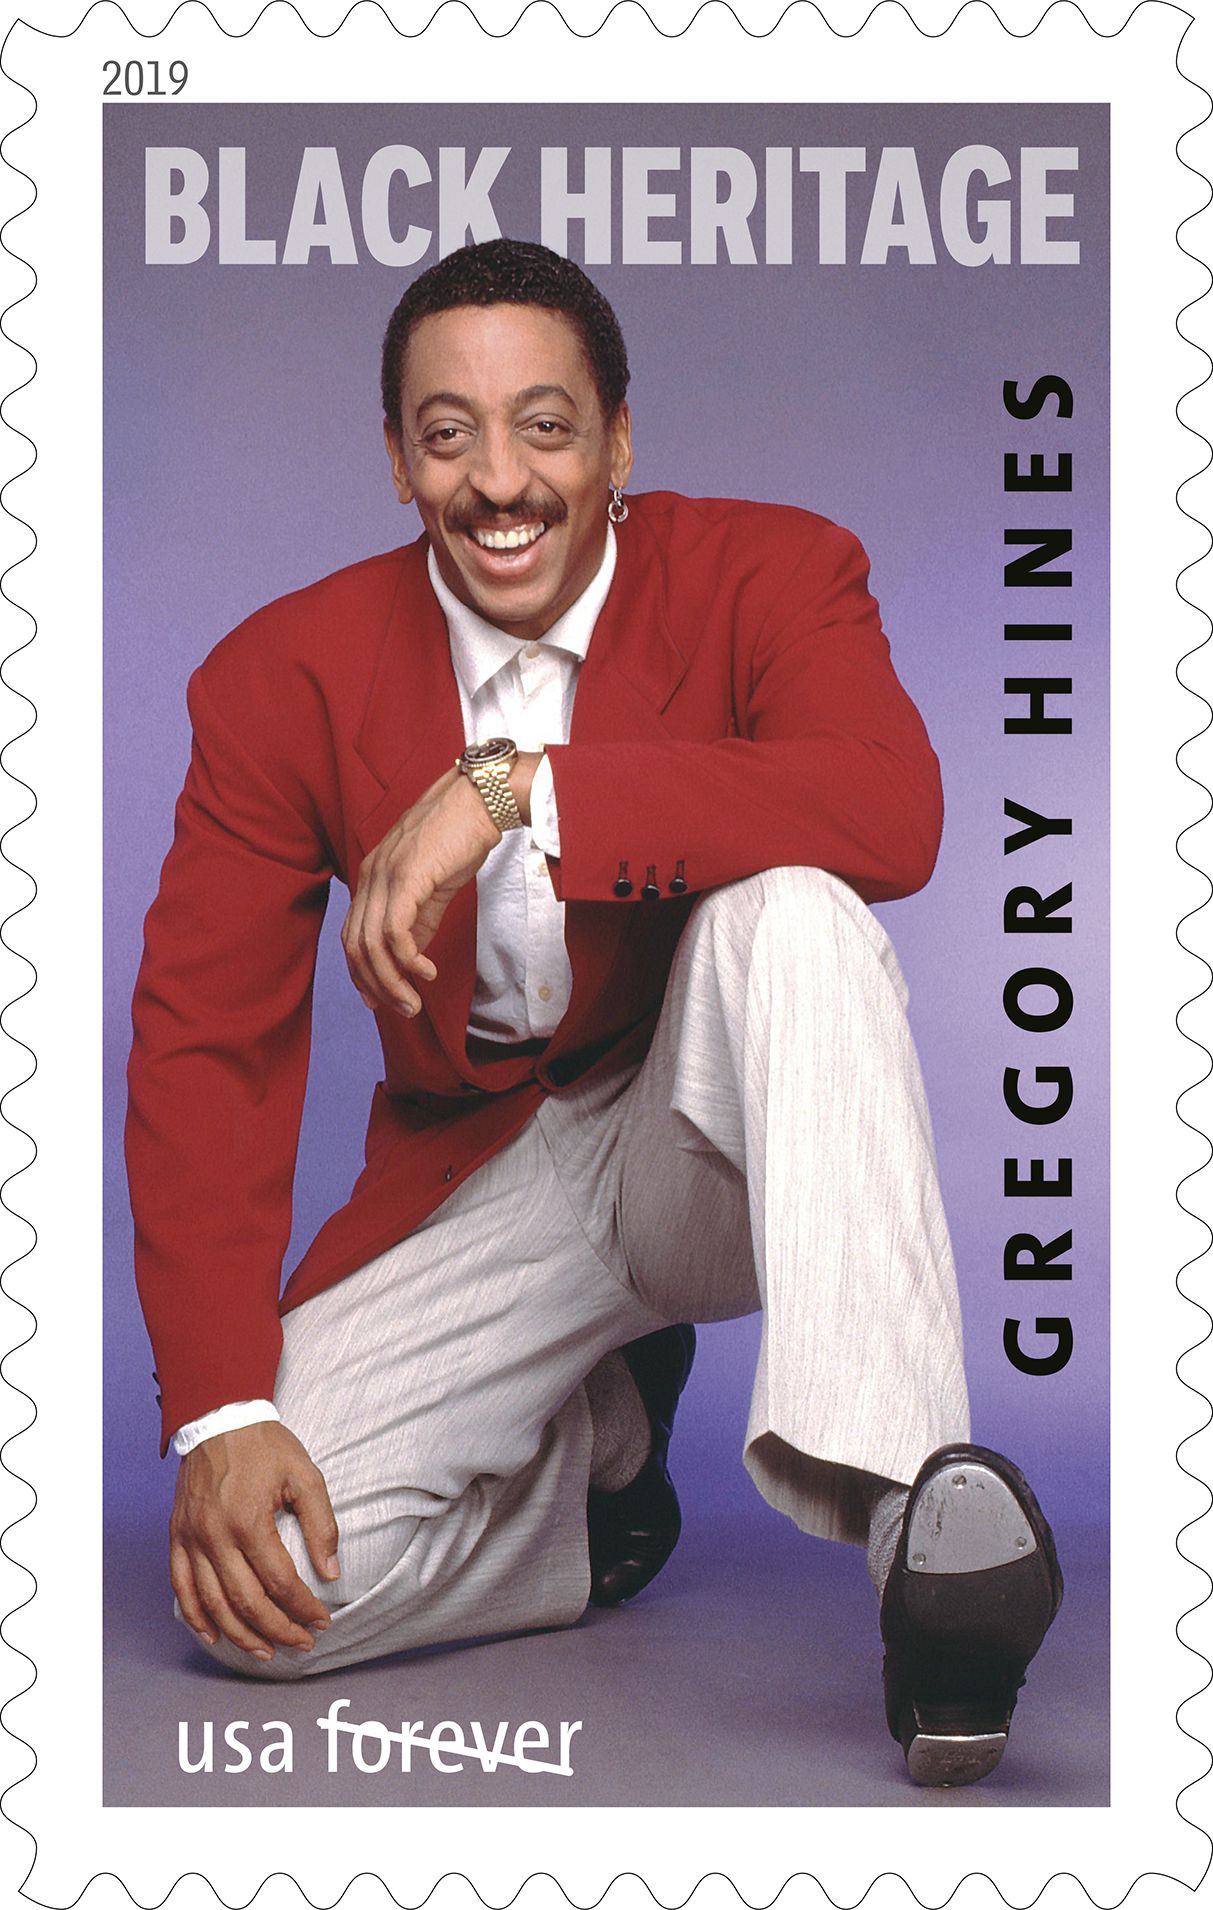 Gregory Hines - January 28, 2019